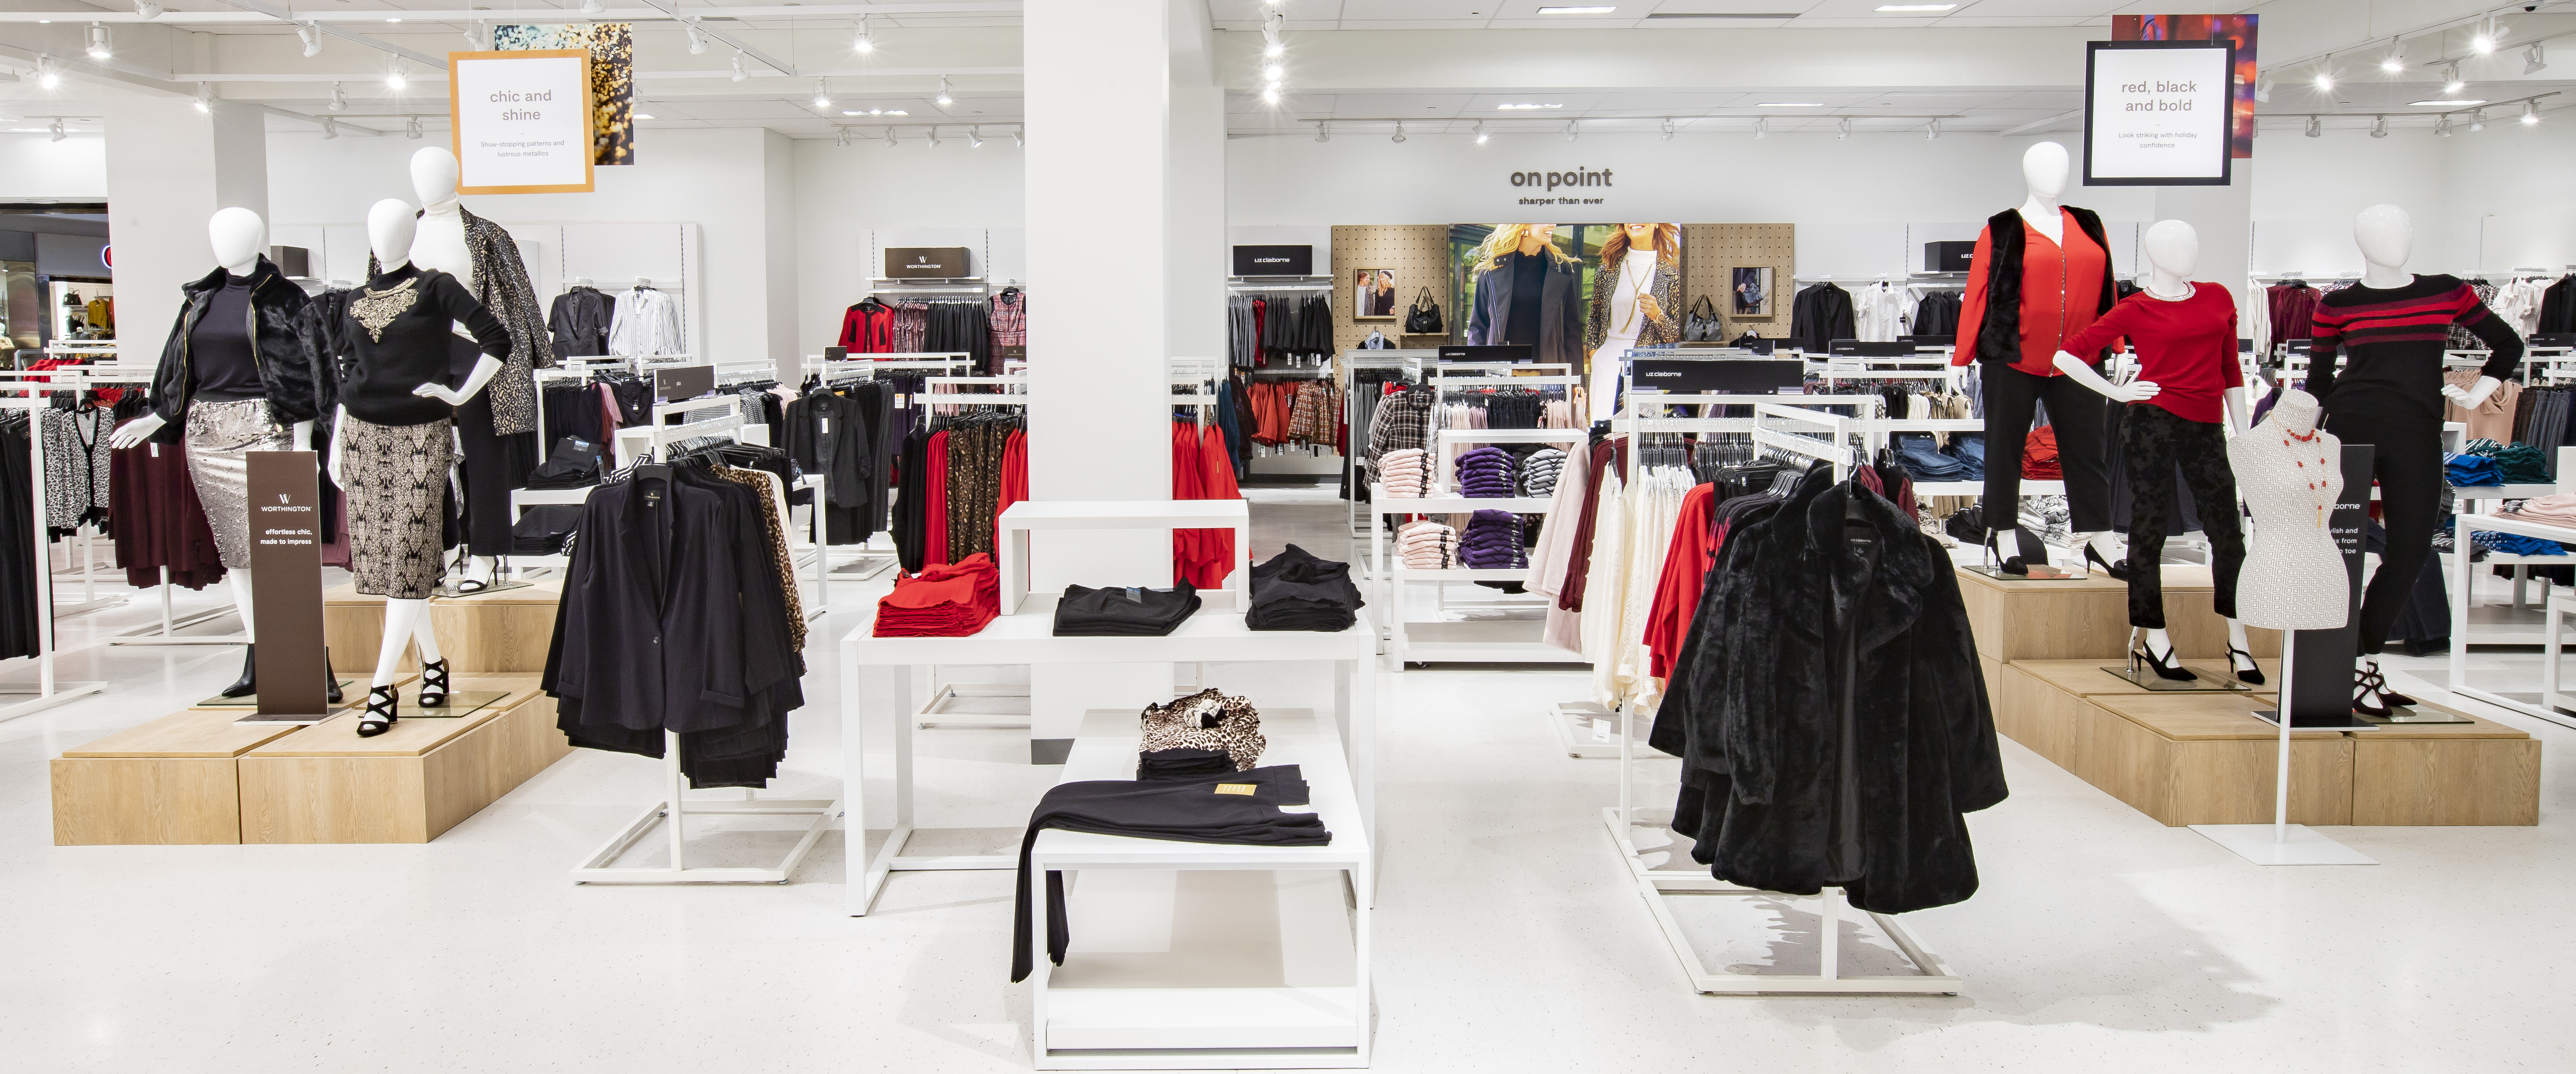 JCPenney Unveils Reimagined Penney's Store to Inspire and